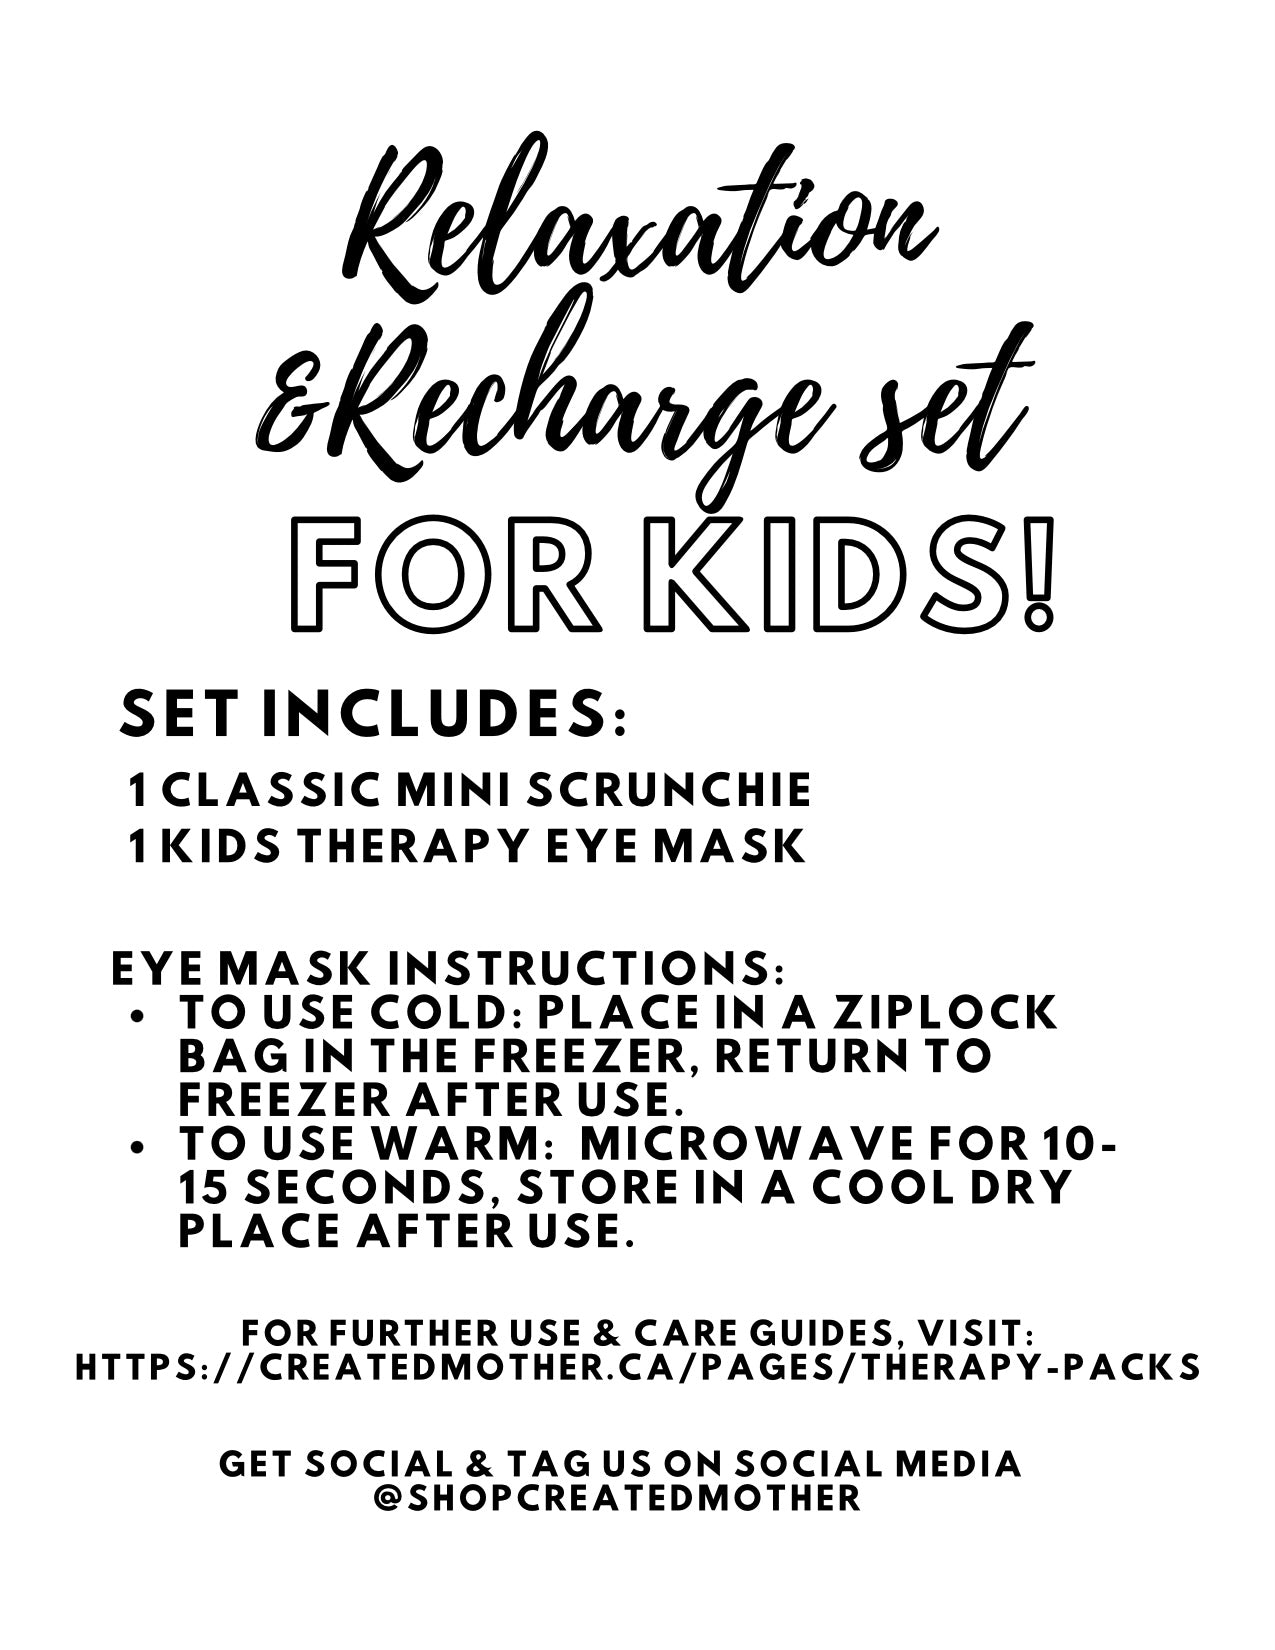 Relaxation & Recharge Sets for KIDS!